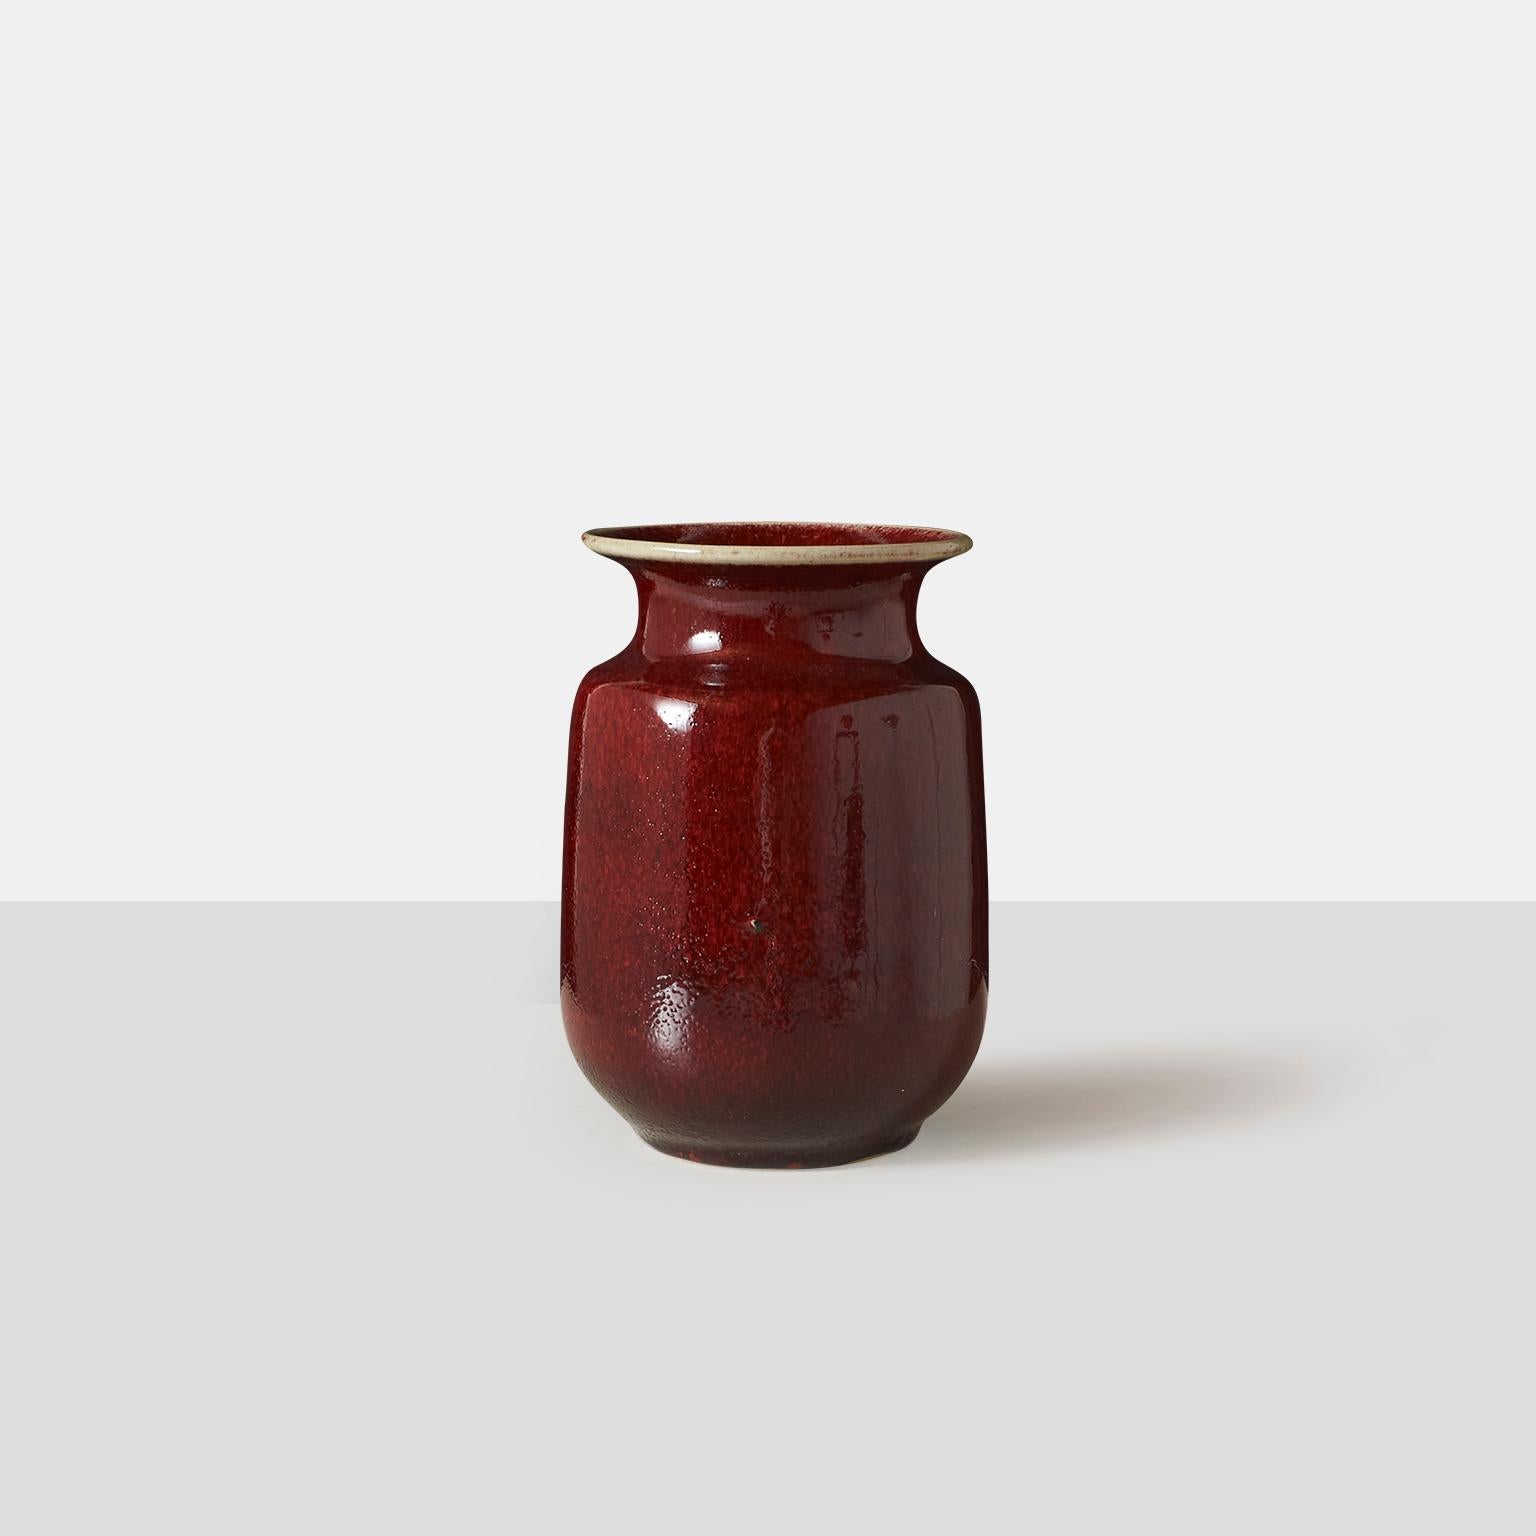 A stoneware vase with a mottled oxblood glaze and contrast natural stone rim. One small scratch near the base. No chips or marks.
Etched on base: K Bolinder Höganäs 1/197